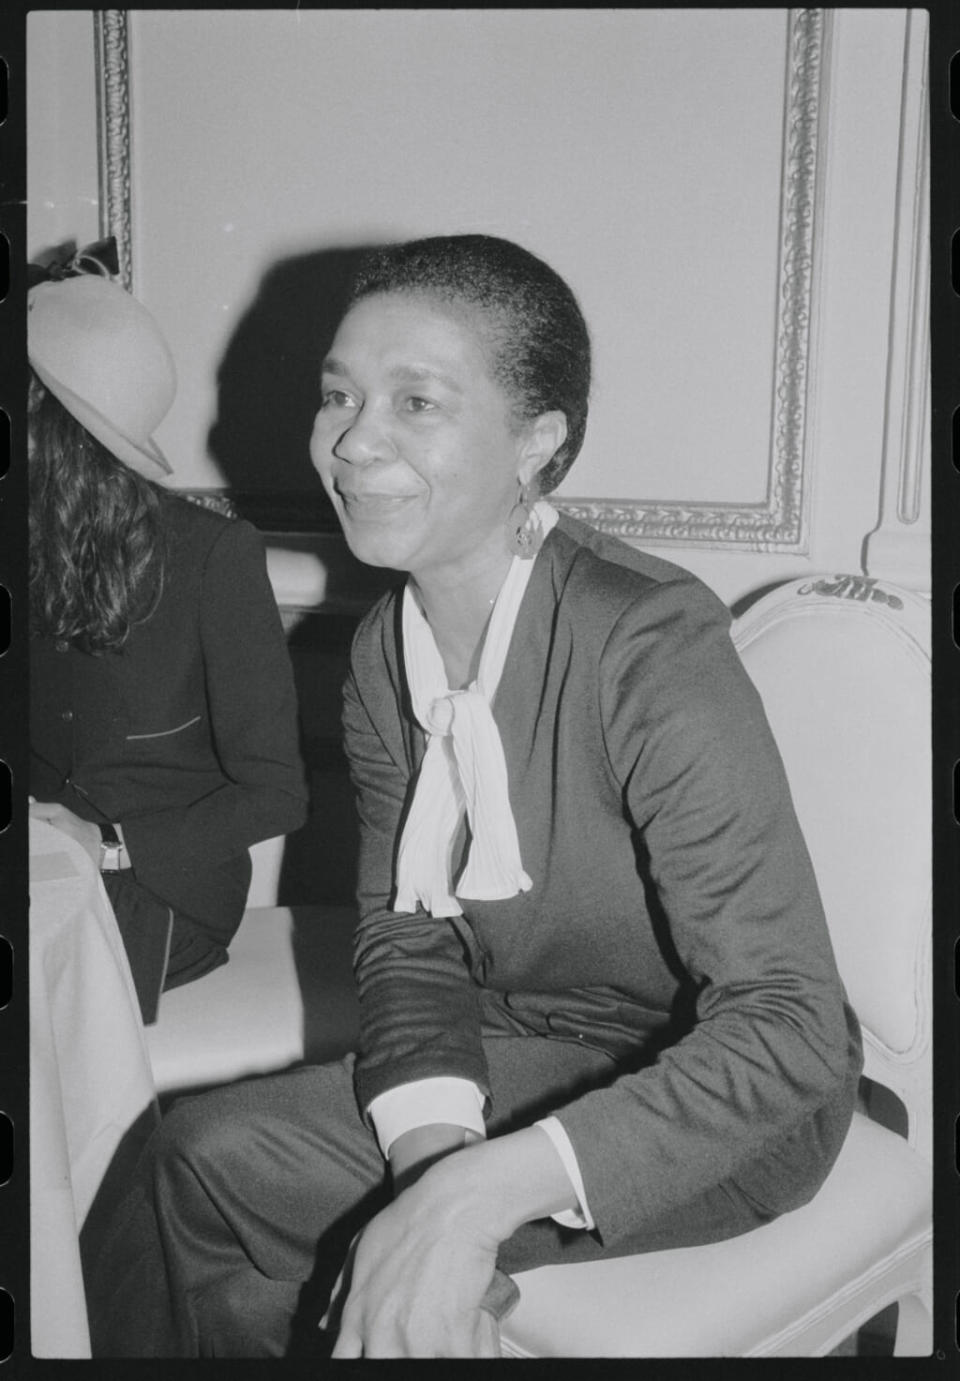 In this file photo, Mary Alice attends the Drama League lunch for Tony nominees. She was nominated for and would go on to win in the category of Best Performance by a Featured Actress in a play for “Fences.” (Photos were made at the Drama League lunch. (Photo by © Bettmann/CORBIS/Bettmann Archive)